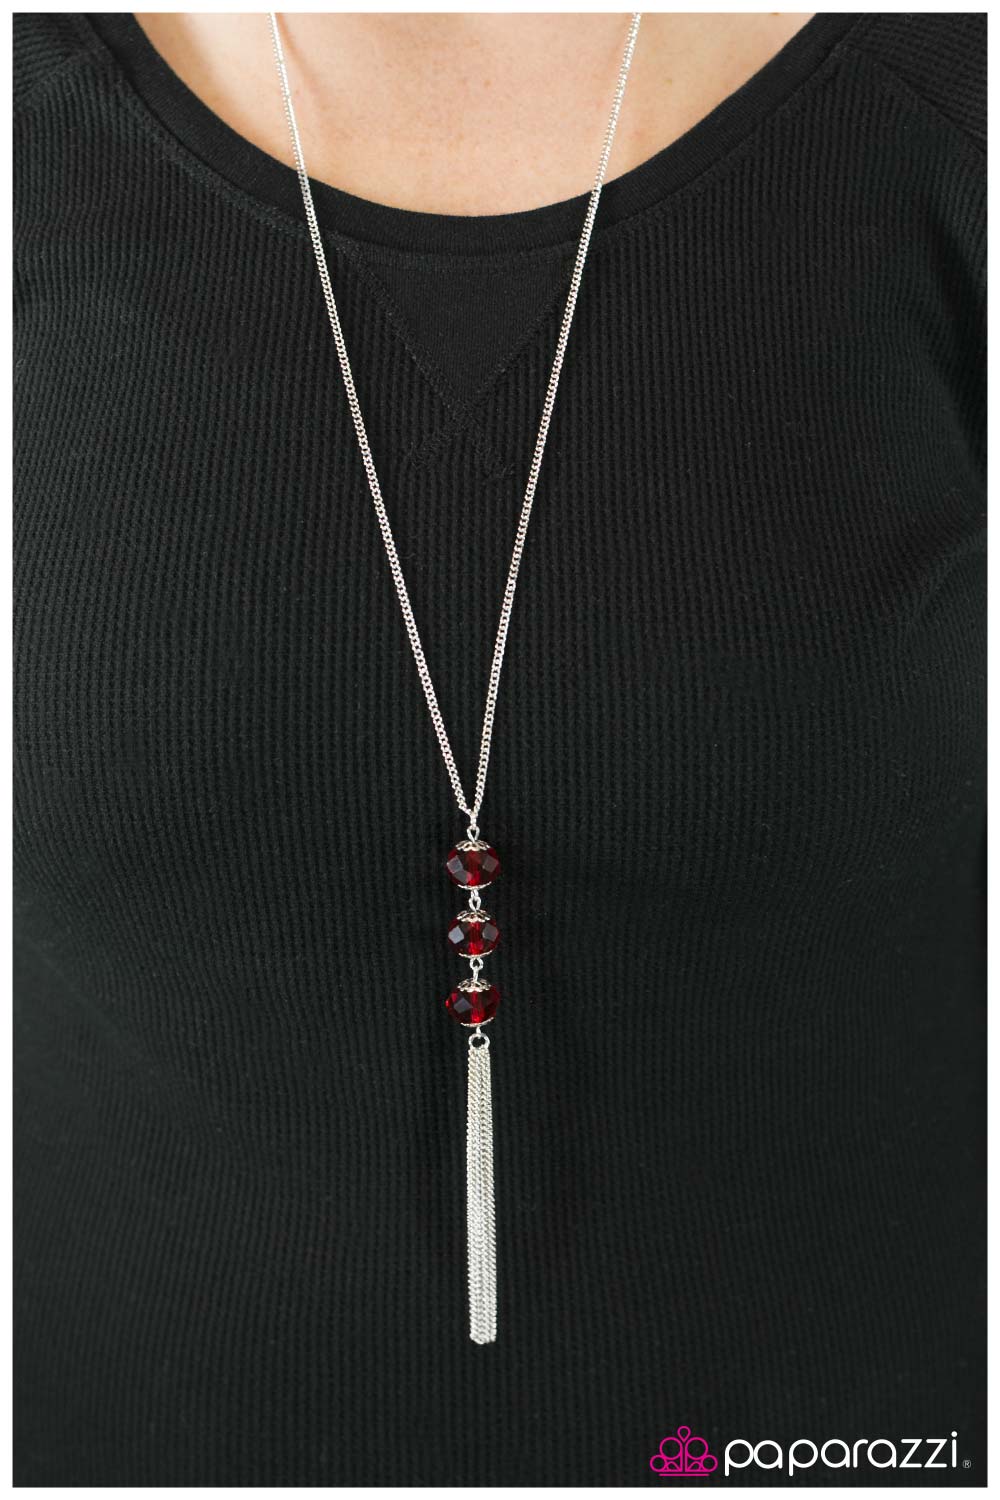 Where theres Smoke, Theres Fire - Red - Paparazzi necklace